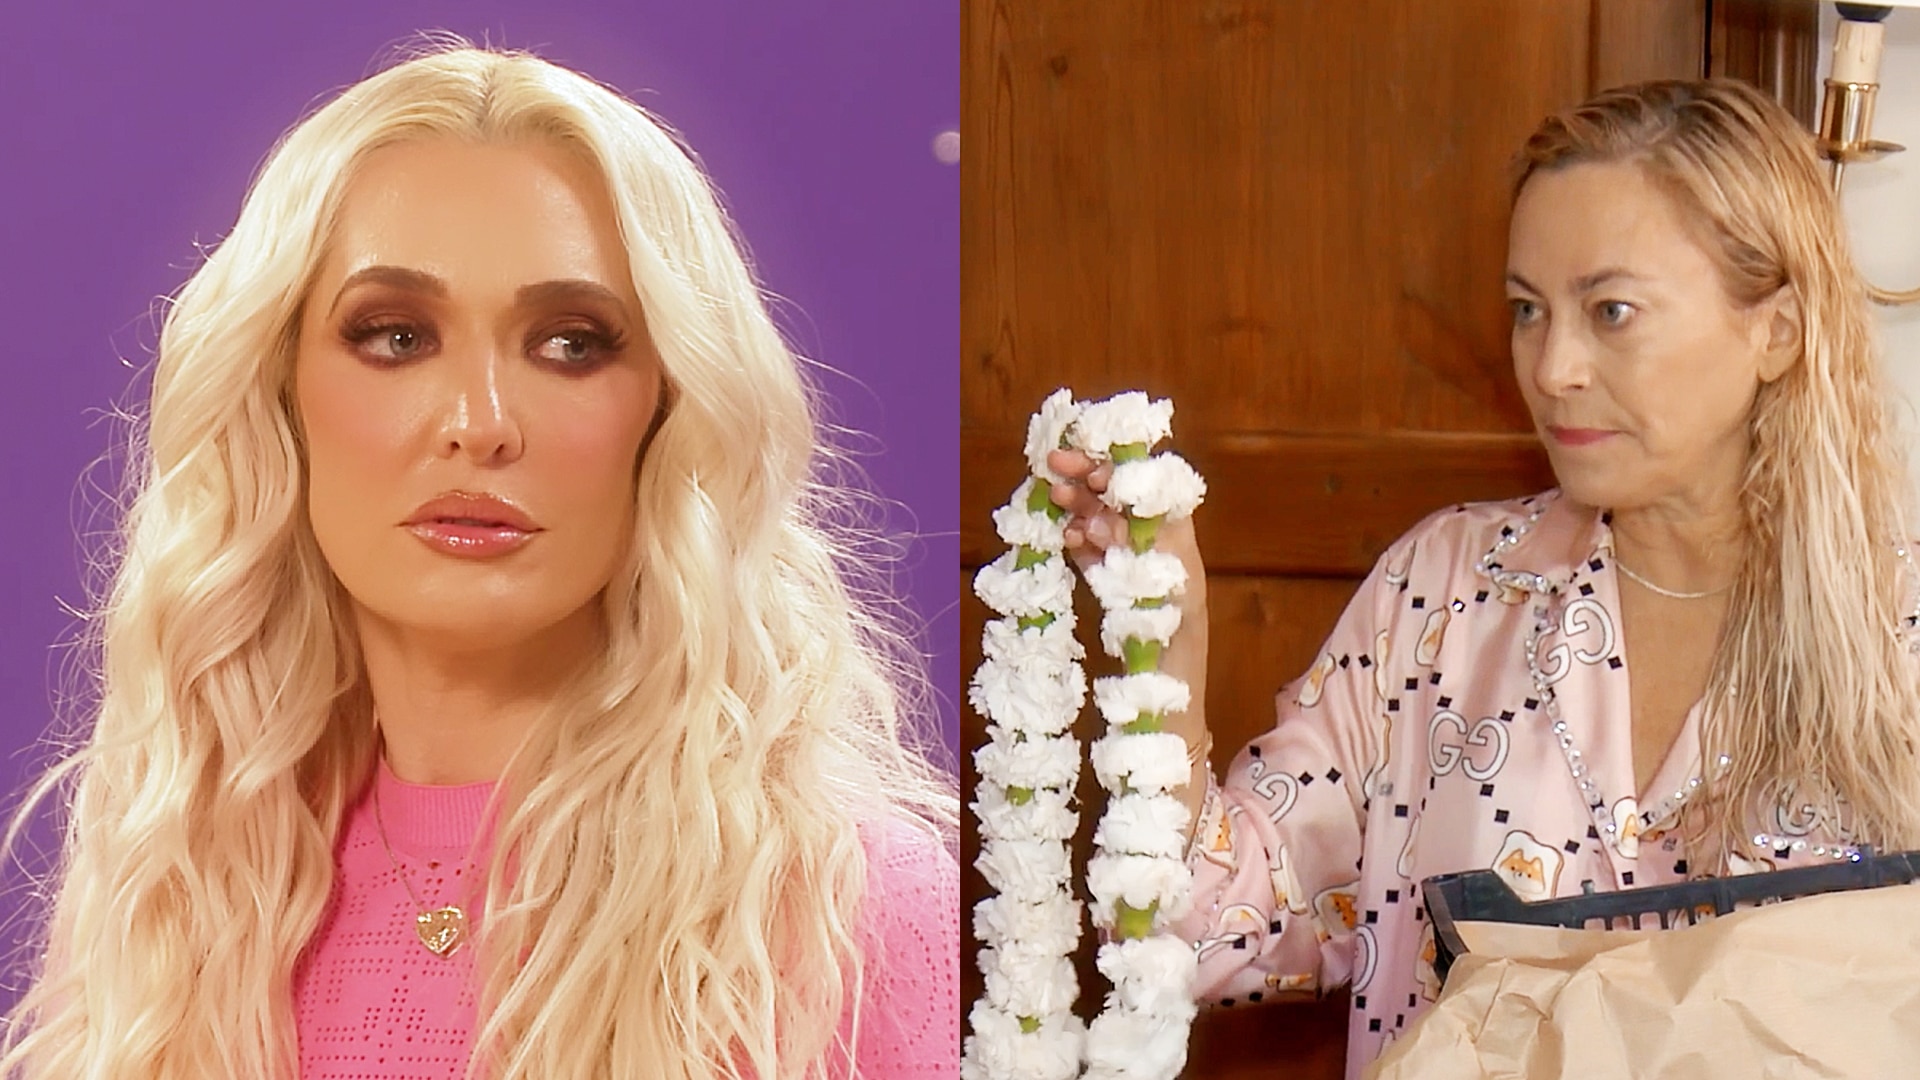 Erika Jayne: "Who's Uneducated Now?"